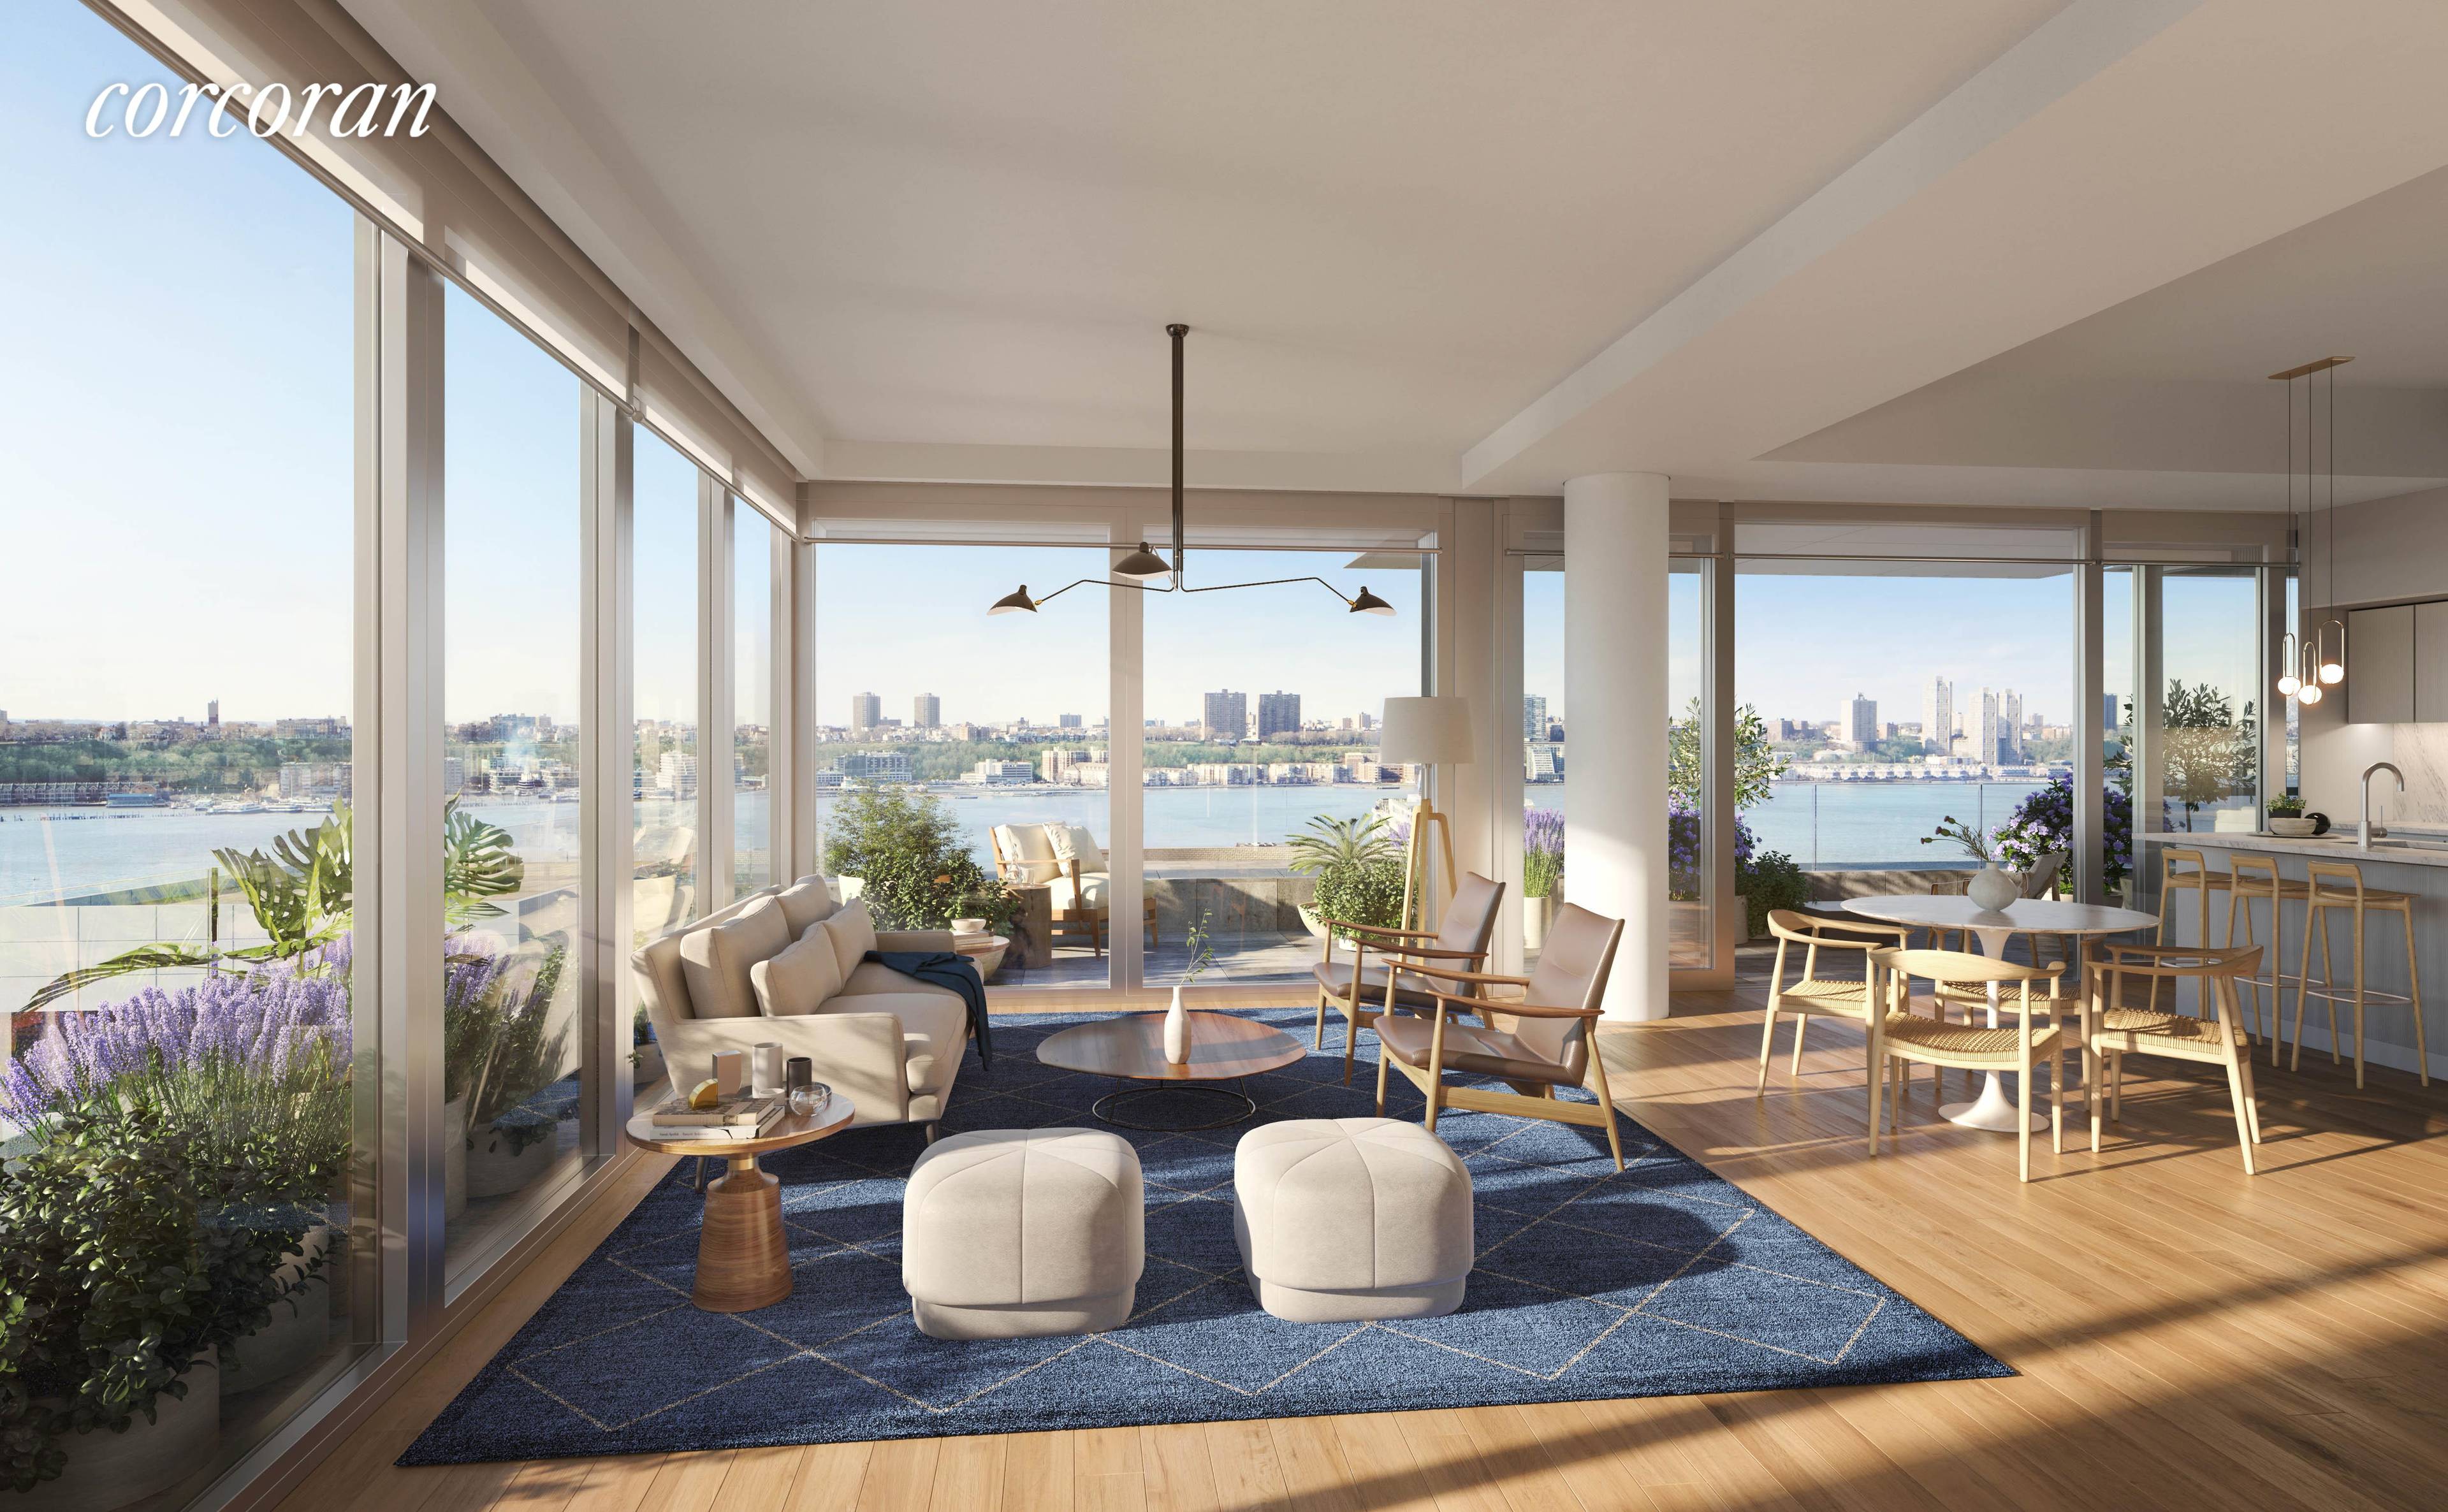 Envisioned by innovative Dutch design team Concrete, 547 West 47th Street takes inspiration from classic New York City factory lofts with open layouts, natural oak flooring, high ceilings and oversized ...